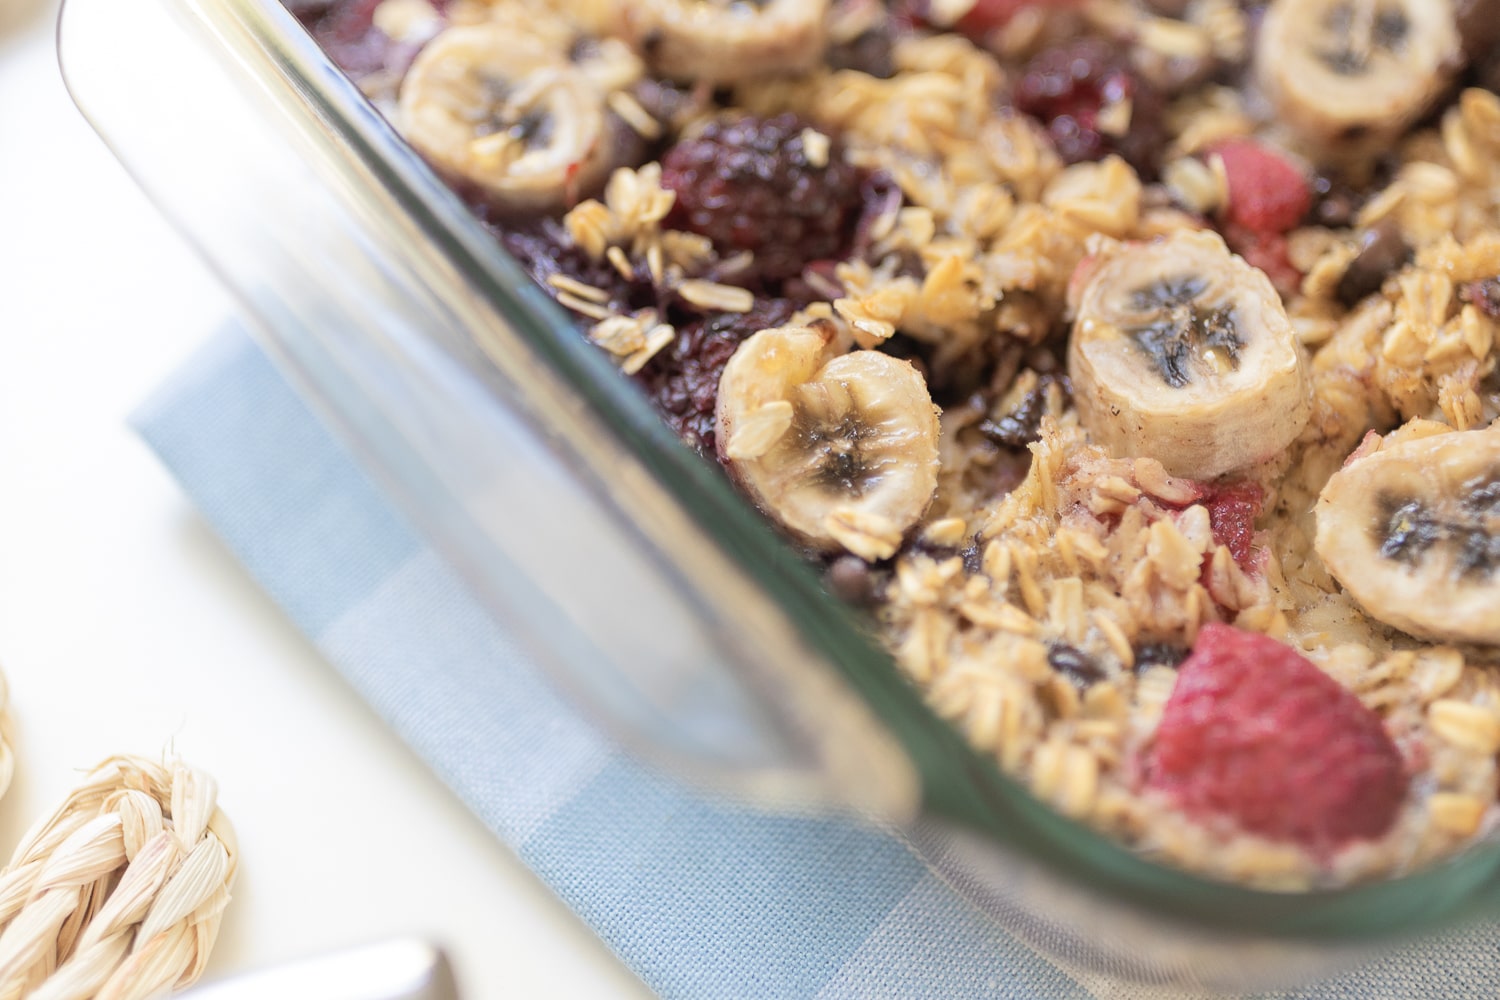 Blogger Stephanie Ziajka shares her breakfast meal prep recipe for baked berry oatmeal bars on Diary of a Debutante